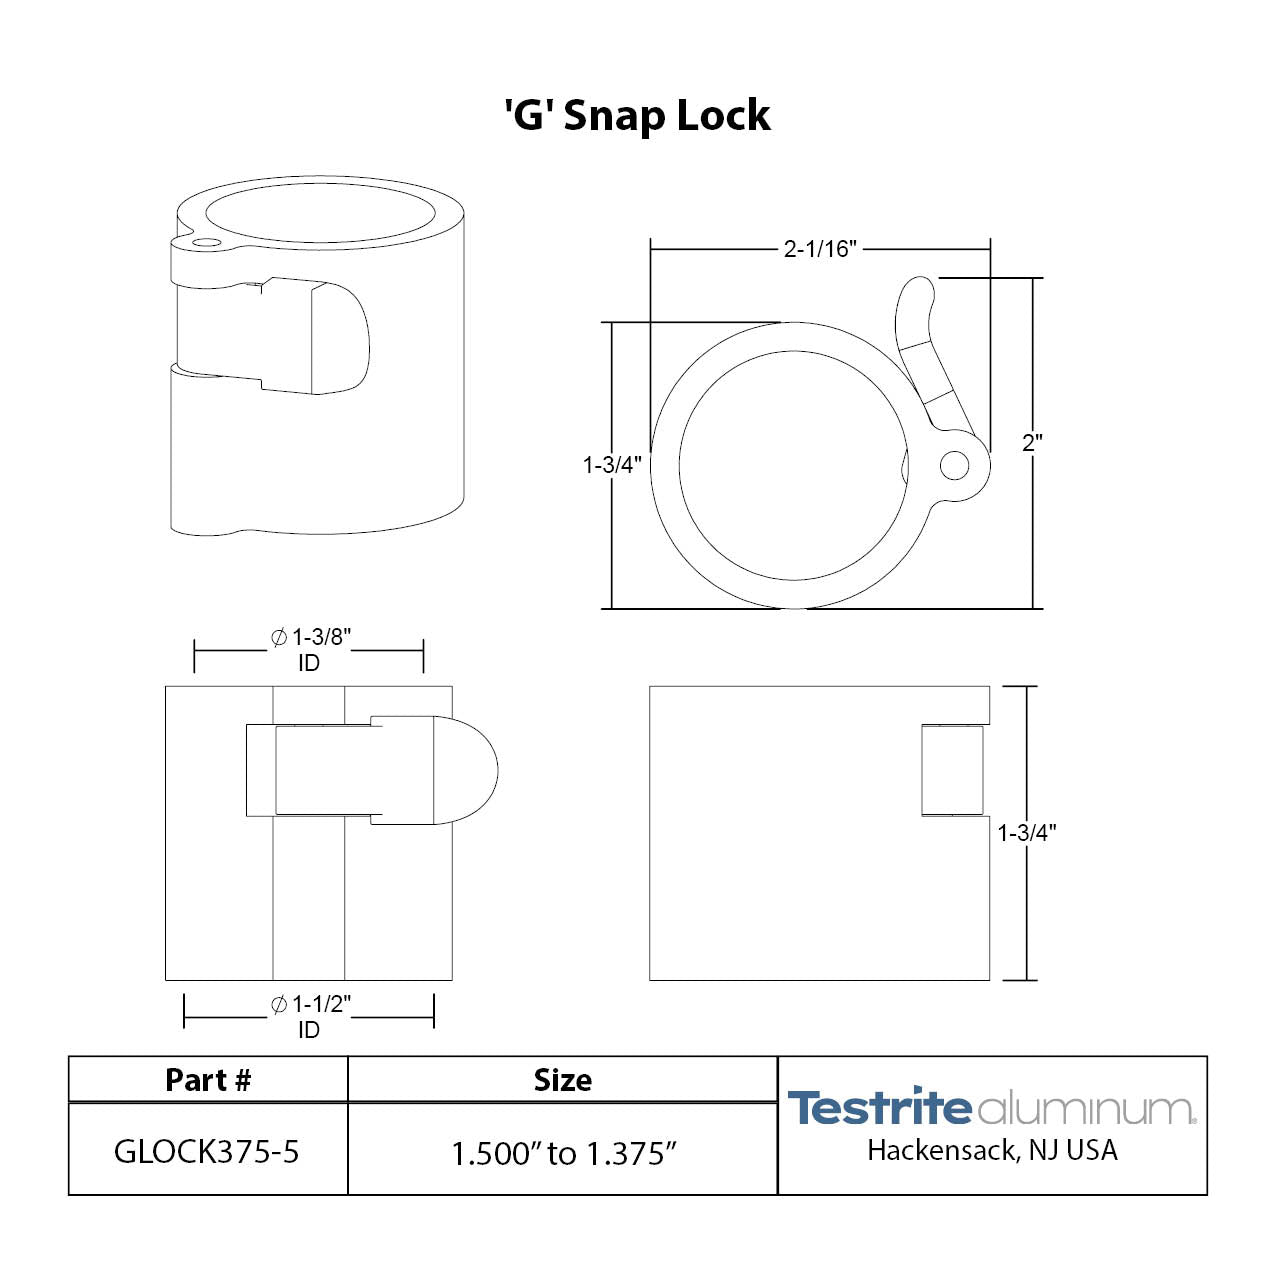 G Lock Spec sheet 1-3/8" to 1-1/2", telescopic tubing clamp 1.375" to 1.5"